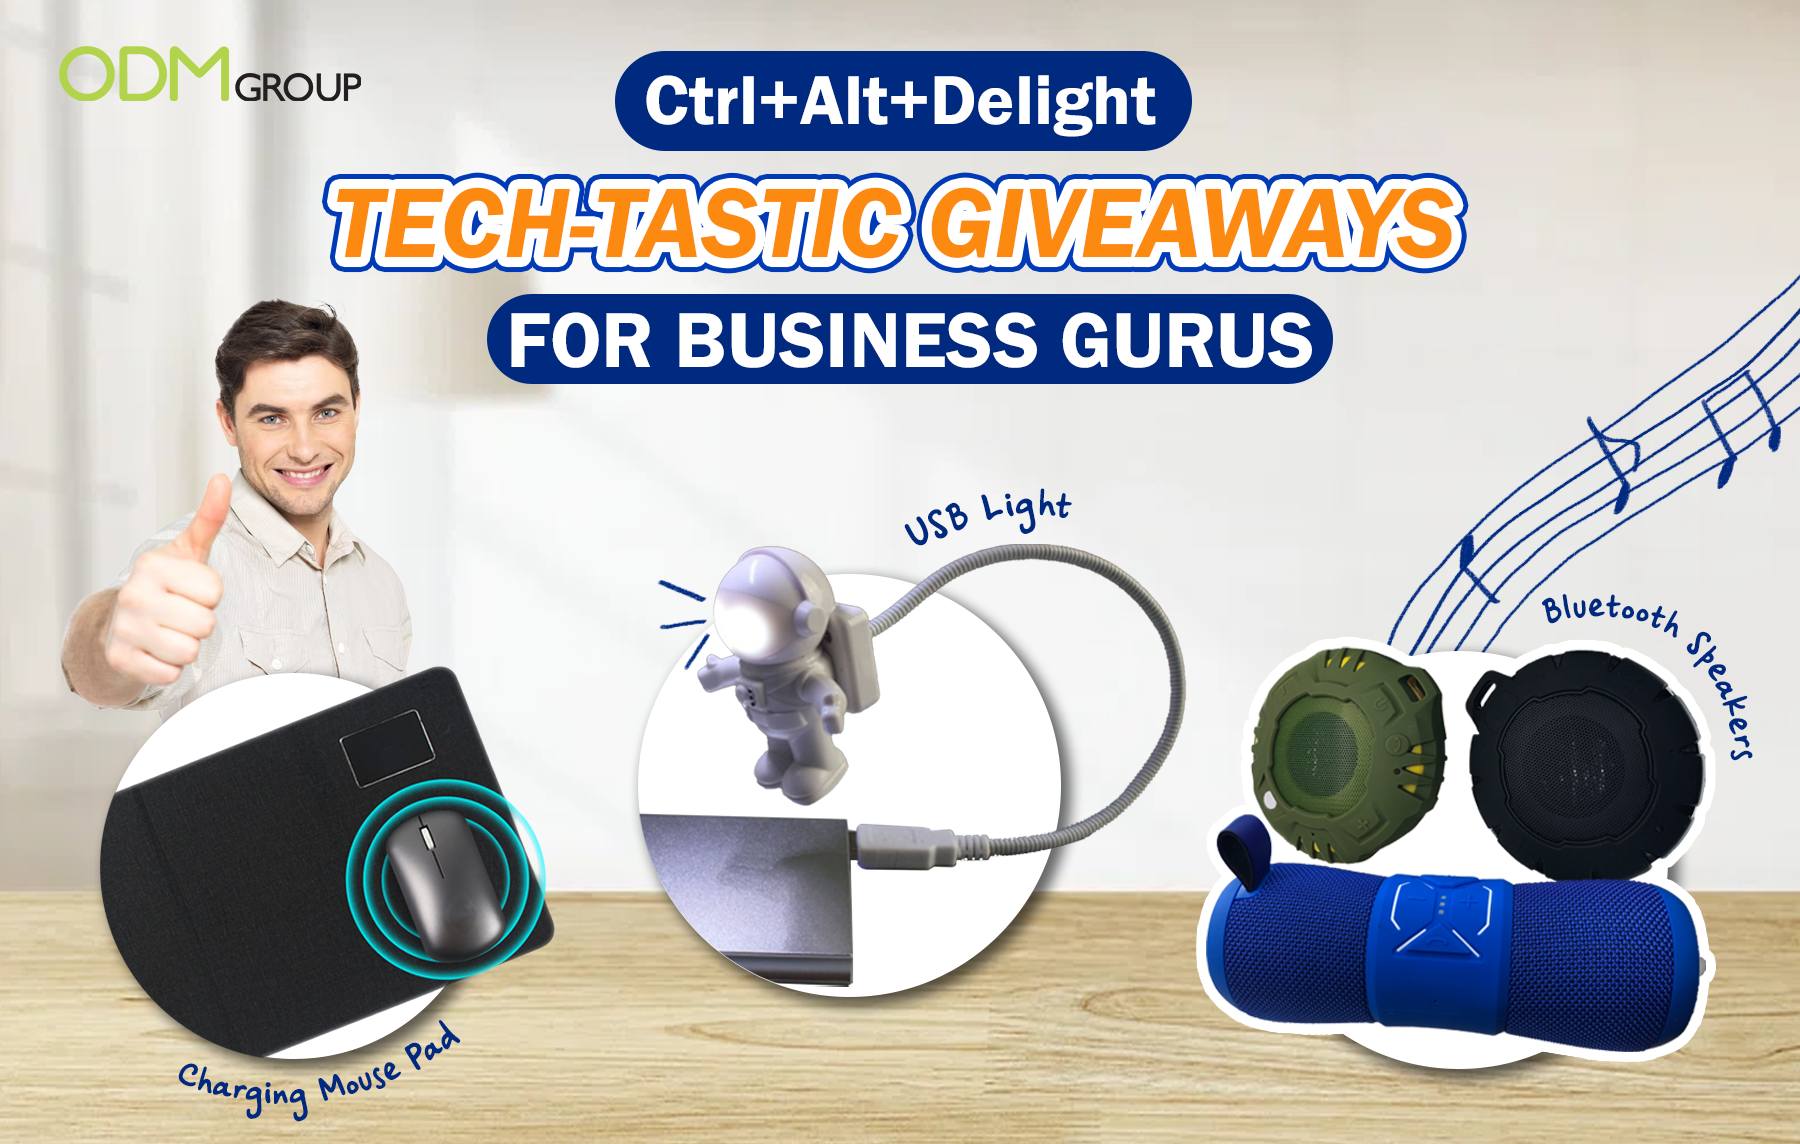 A selection of tech gadgets including a charging mouse pad, USB light, and Bluetooth speakers for business giveaways.